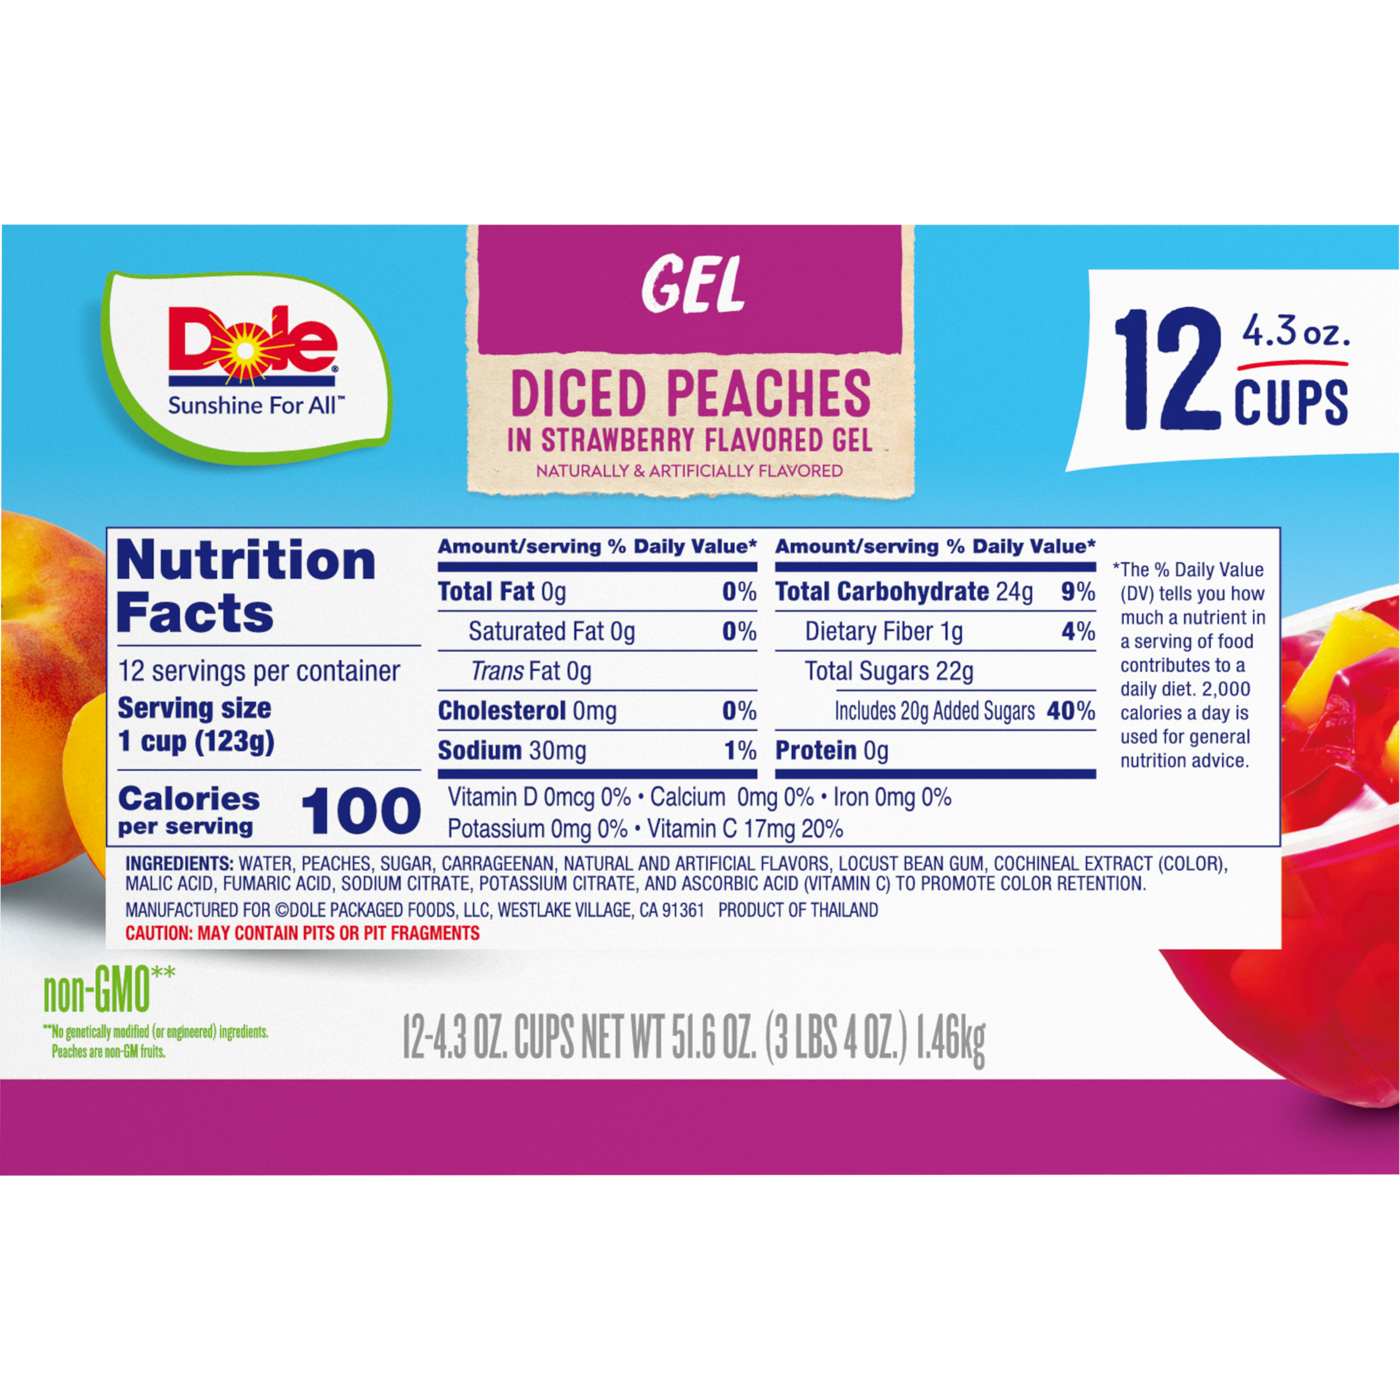 Dole Fruit Bowls - Diced Peaches in Strawberry Flavored Gel; image 5 of 7